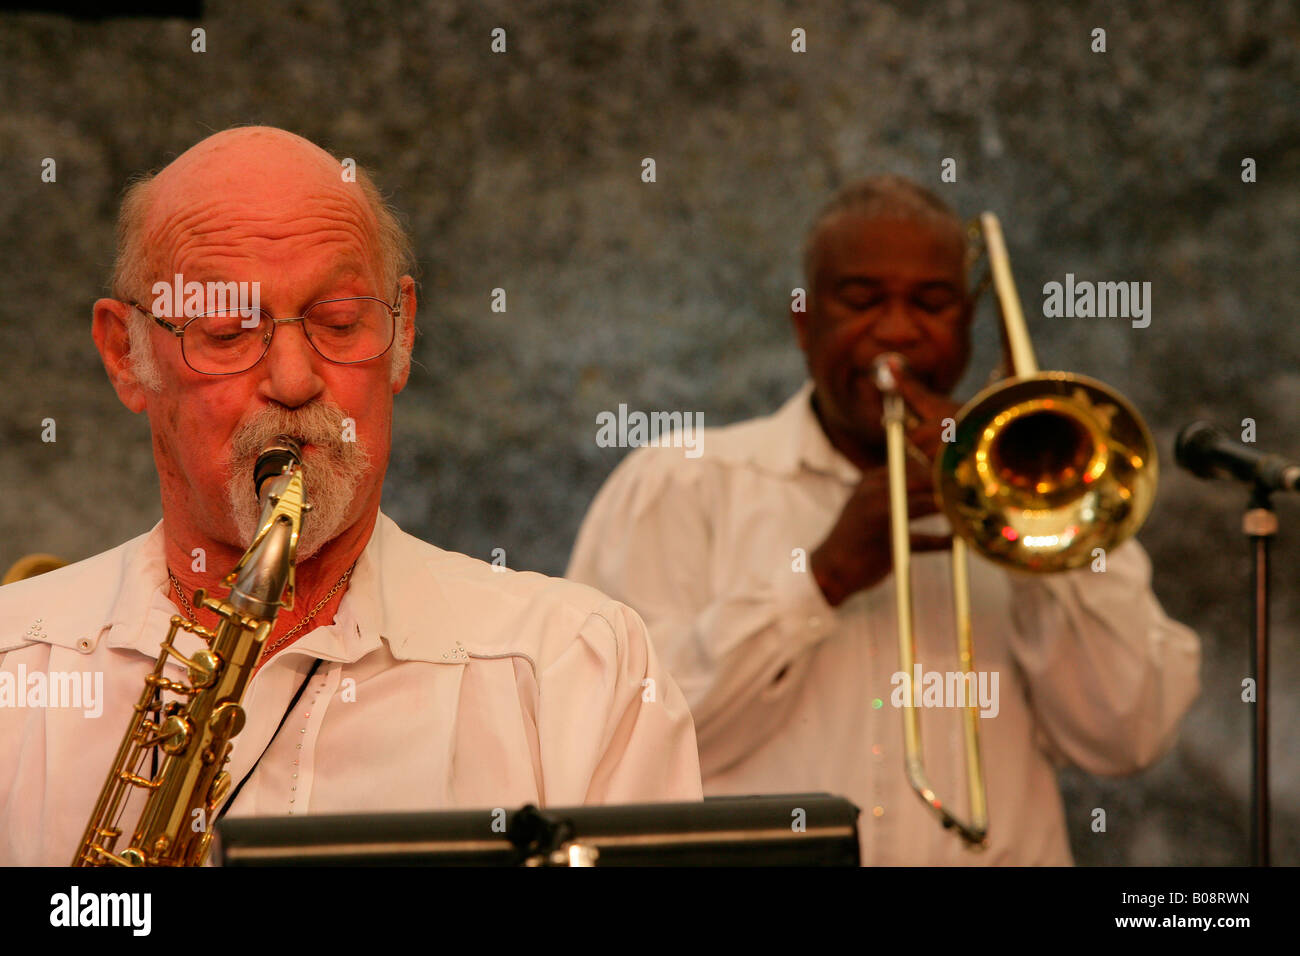 Ambros Seelos and band performing at a jazz festival in Muehldorf am Inn, Bavaria, Germany Stock Photo